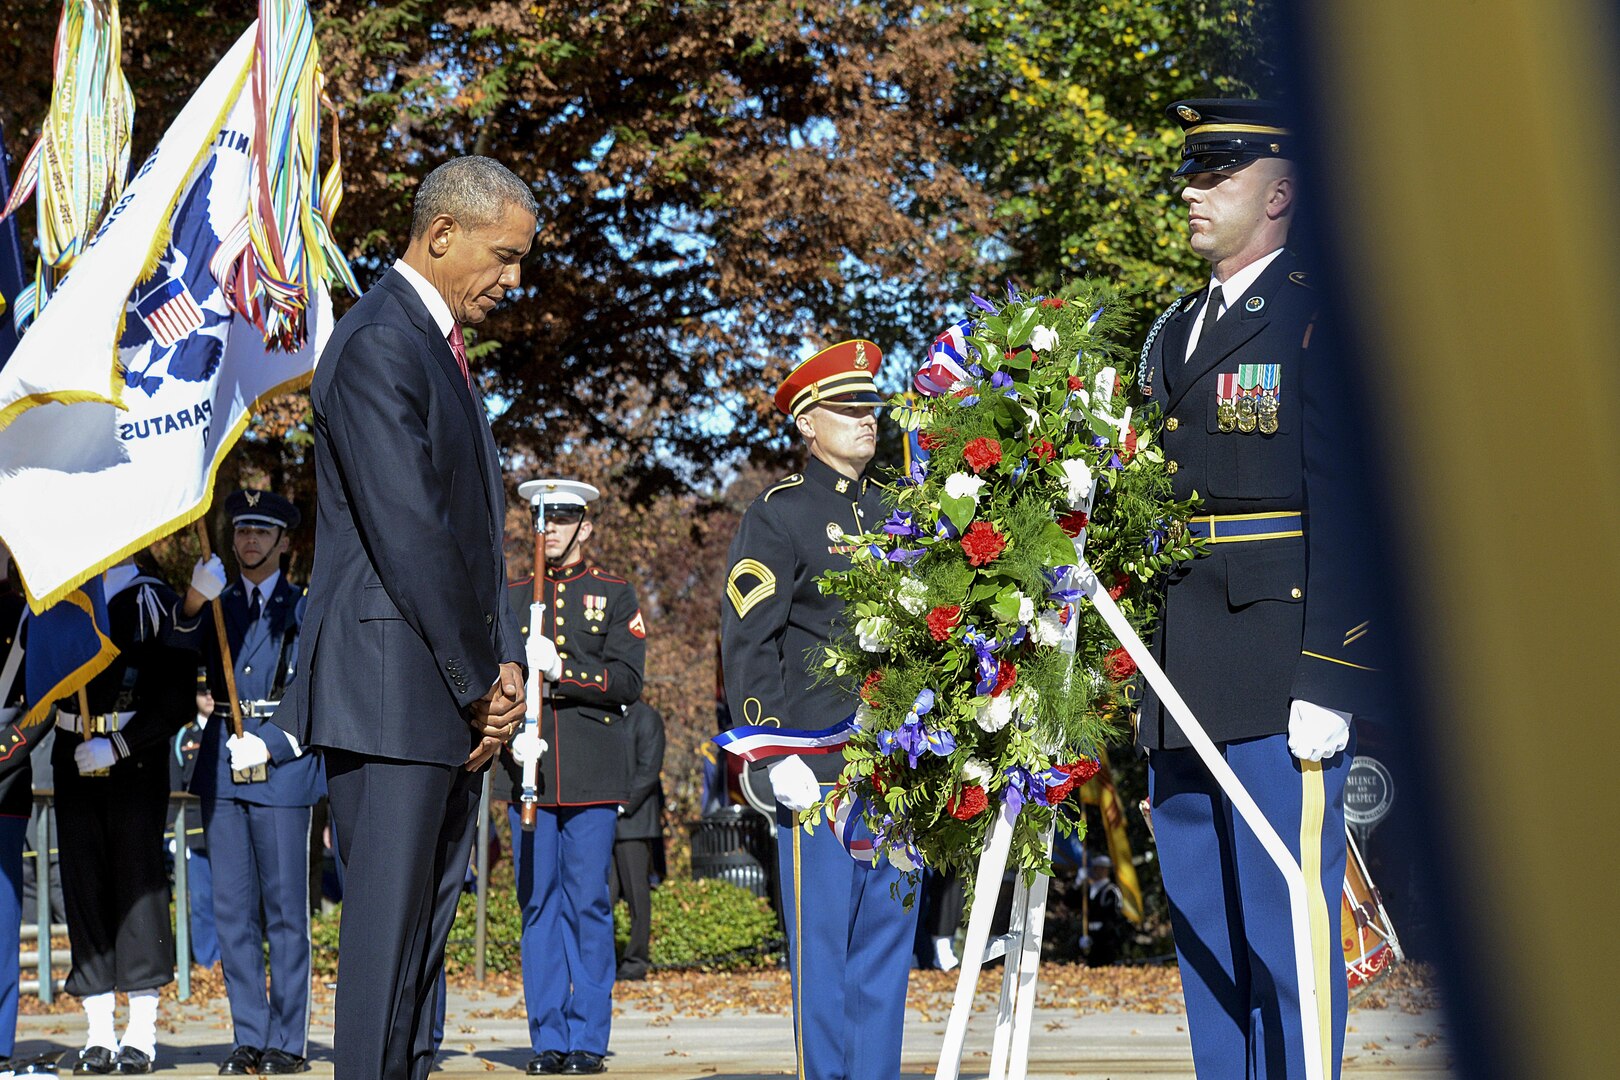 President Barack Obama bows his head at the 62nd annual national Veterans Day observance at Arlington National Cemetery in Arlington, Va., Nov. 11, 2015. DoD photo by Army Sgt. 1st Class Clydell Kinchen

